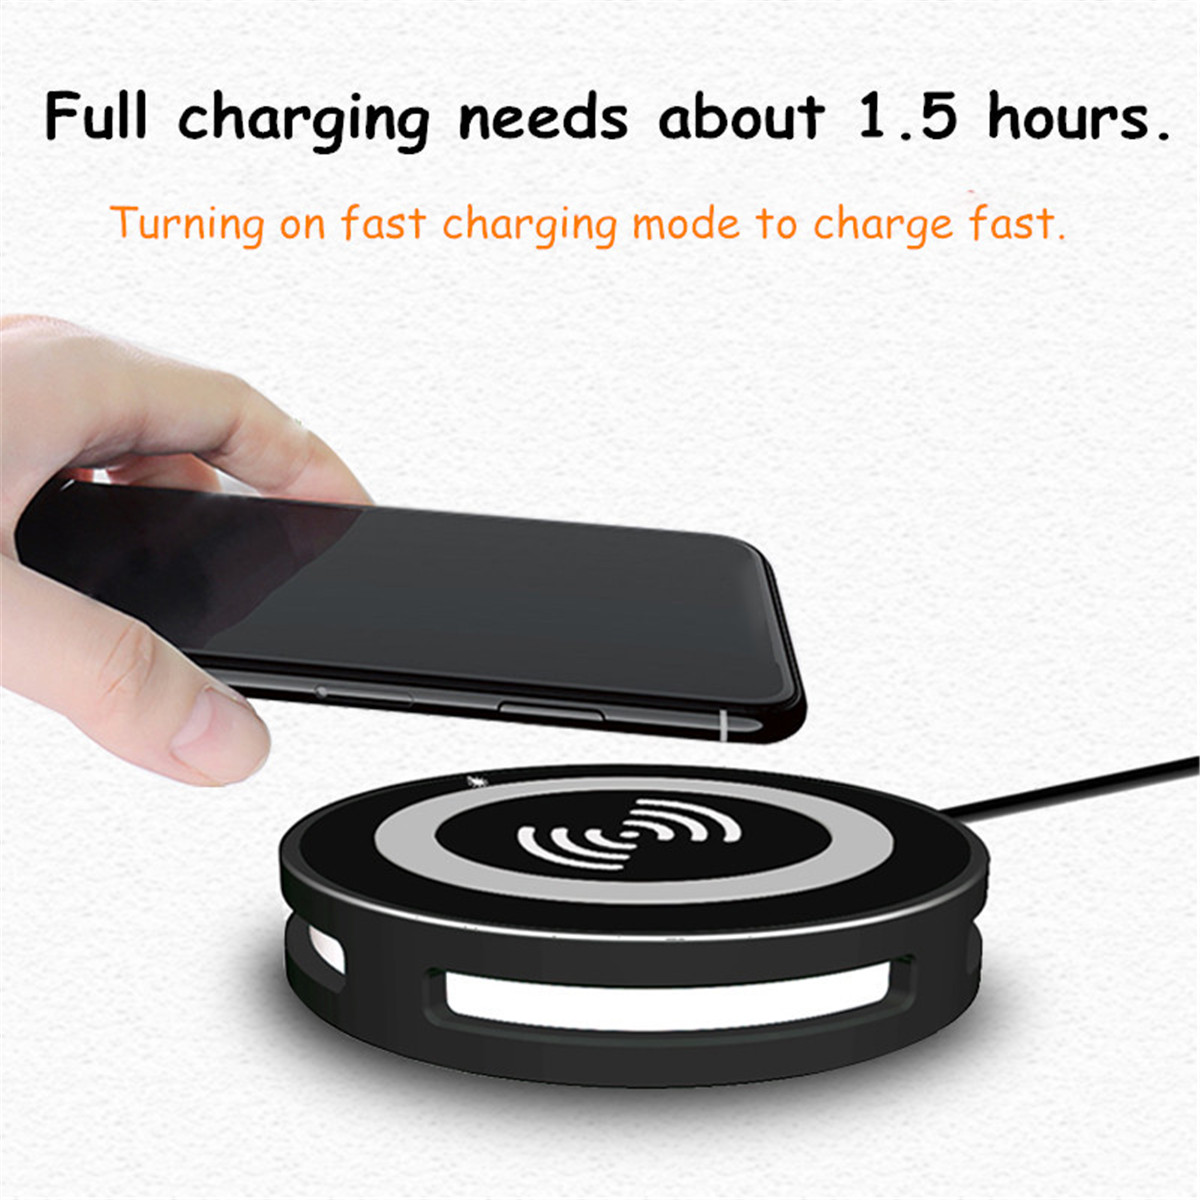 9V Qi Standard Wireless LED Fast Charger Desktop Pad for iPhone 8 X Plus S8 S9 Note 8